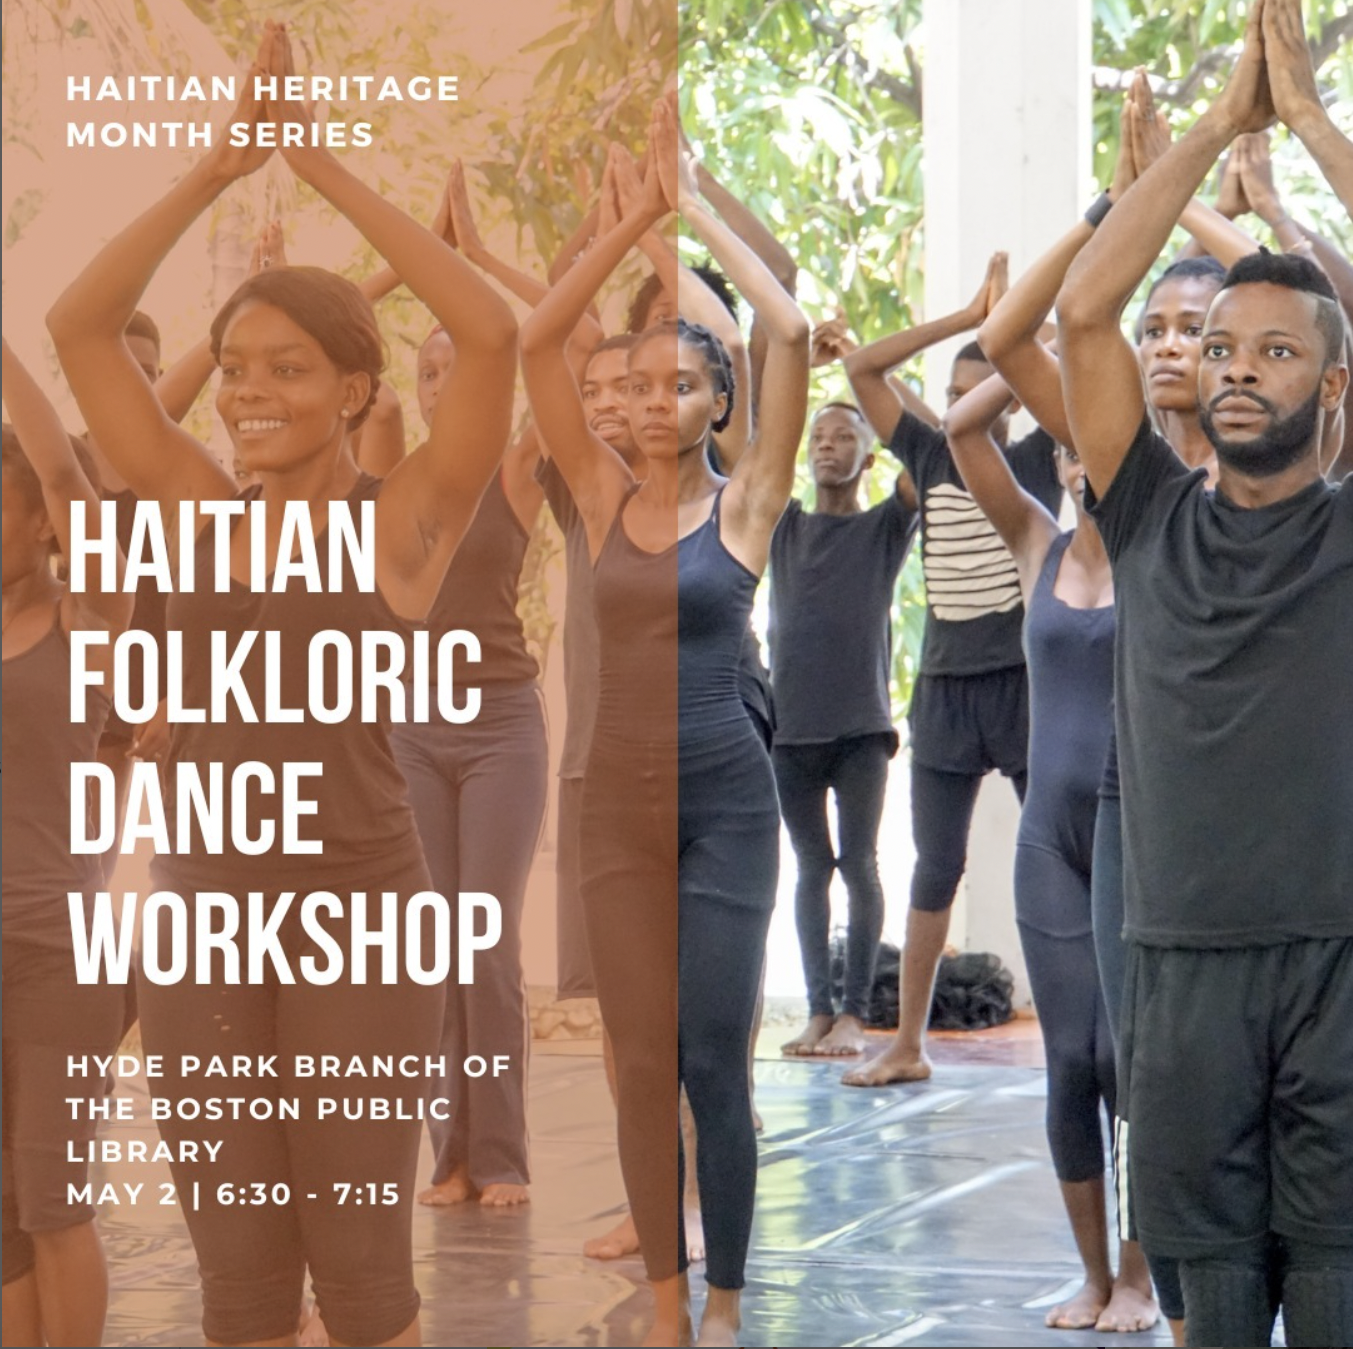 Haitian Folkloric Dance Workshop with event information on the left over photo of multiple dancers with hands over head.